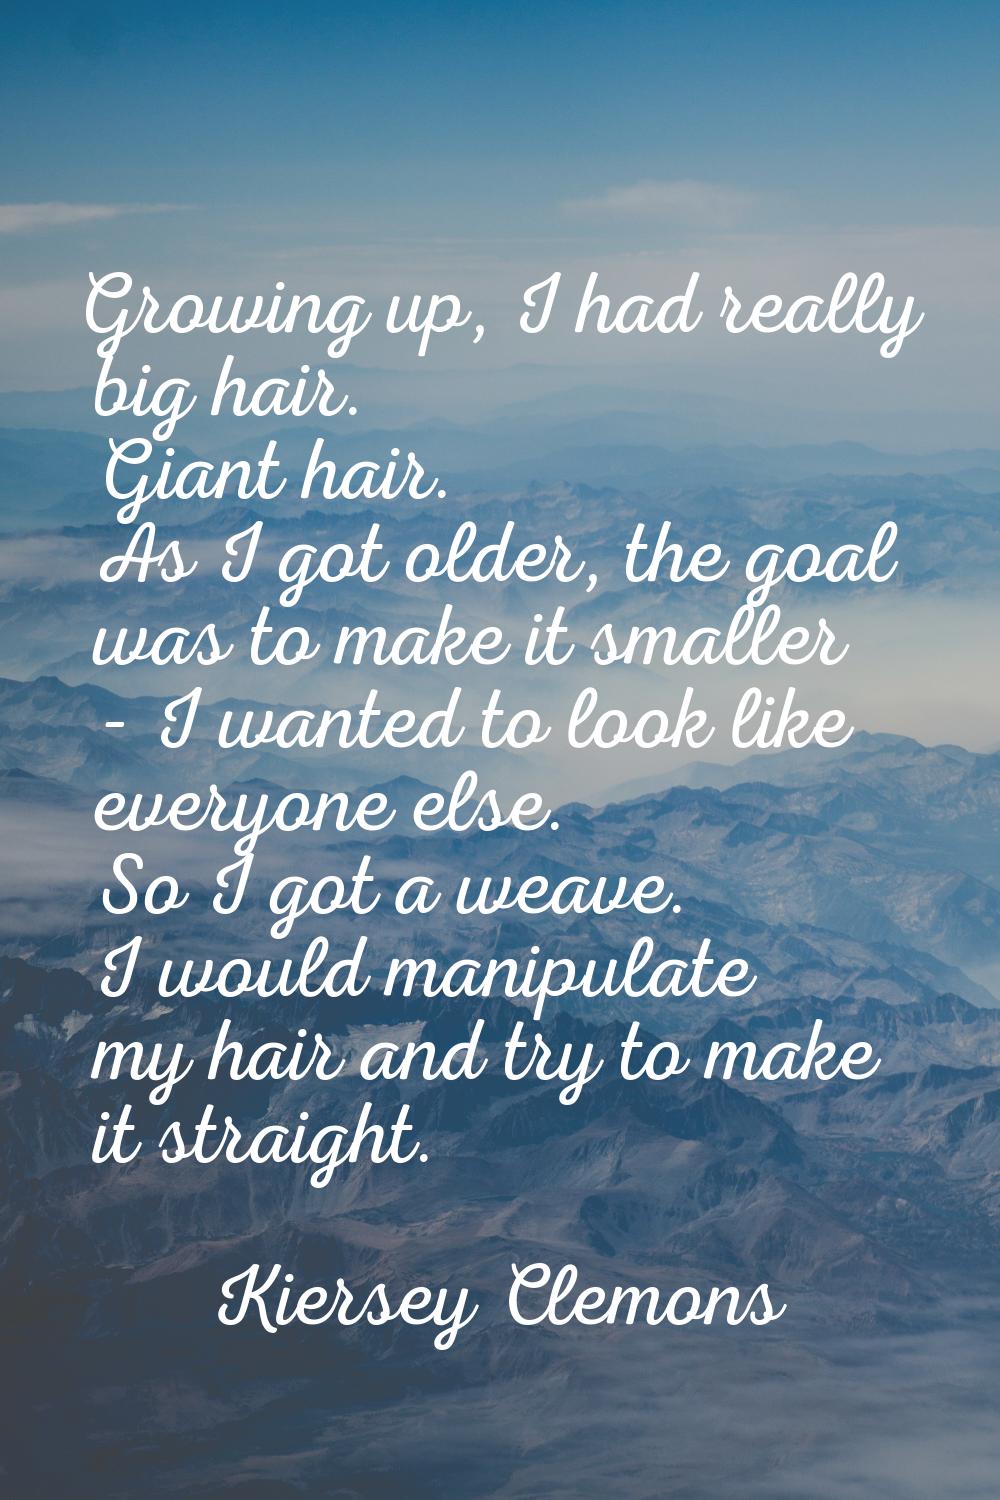 Growing up, I had really big hair. Giant hair. As I got older, the goal was to make it smaller - I 